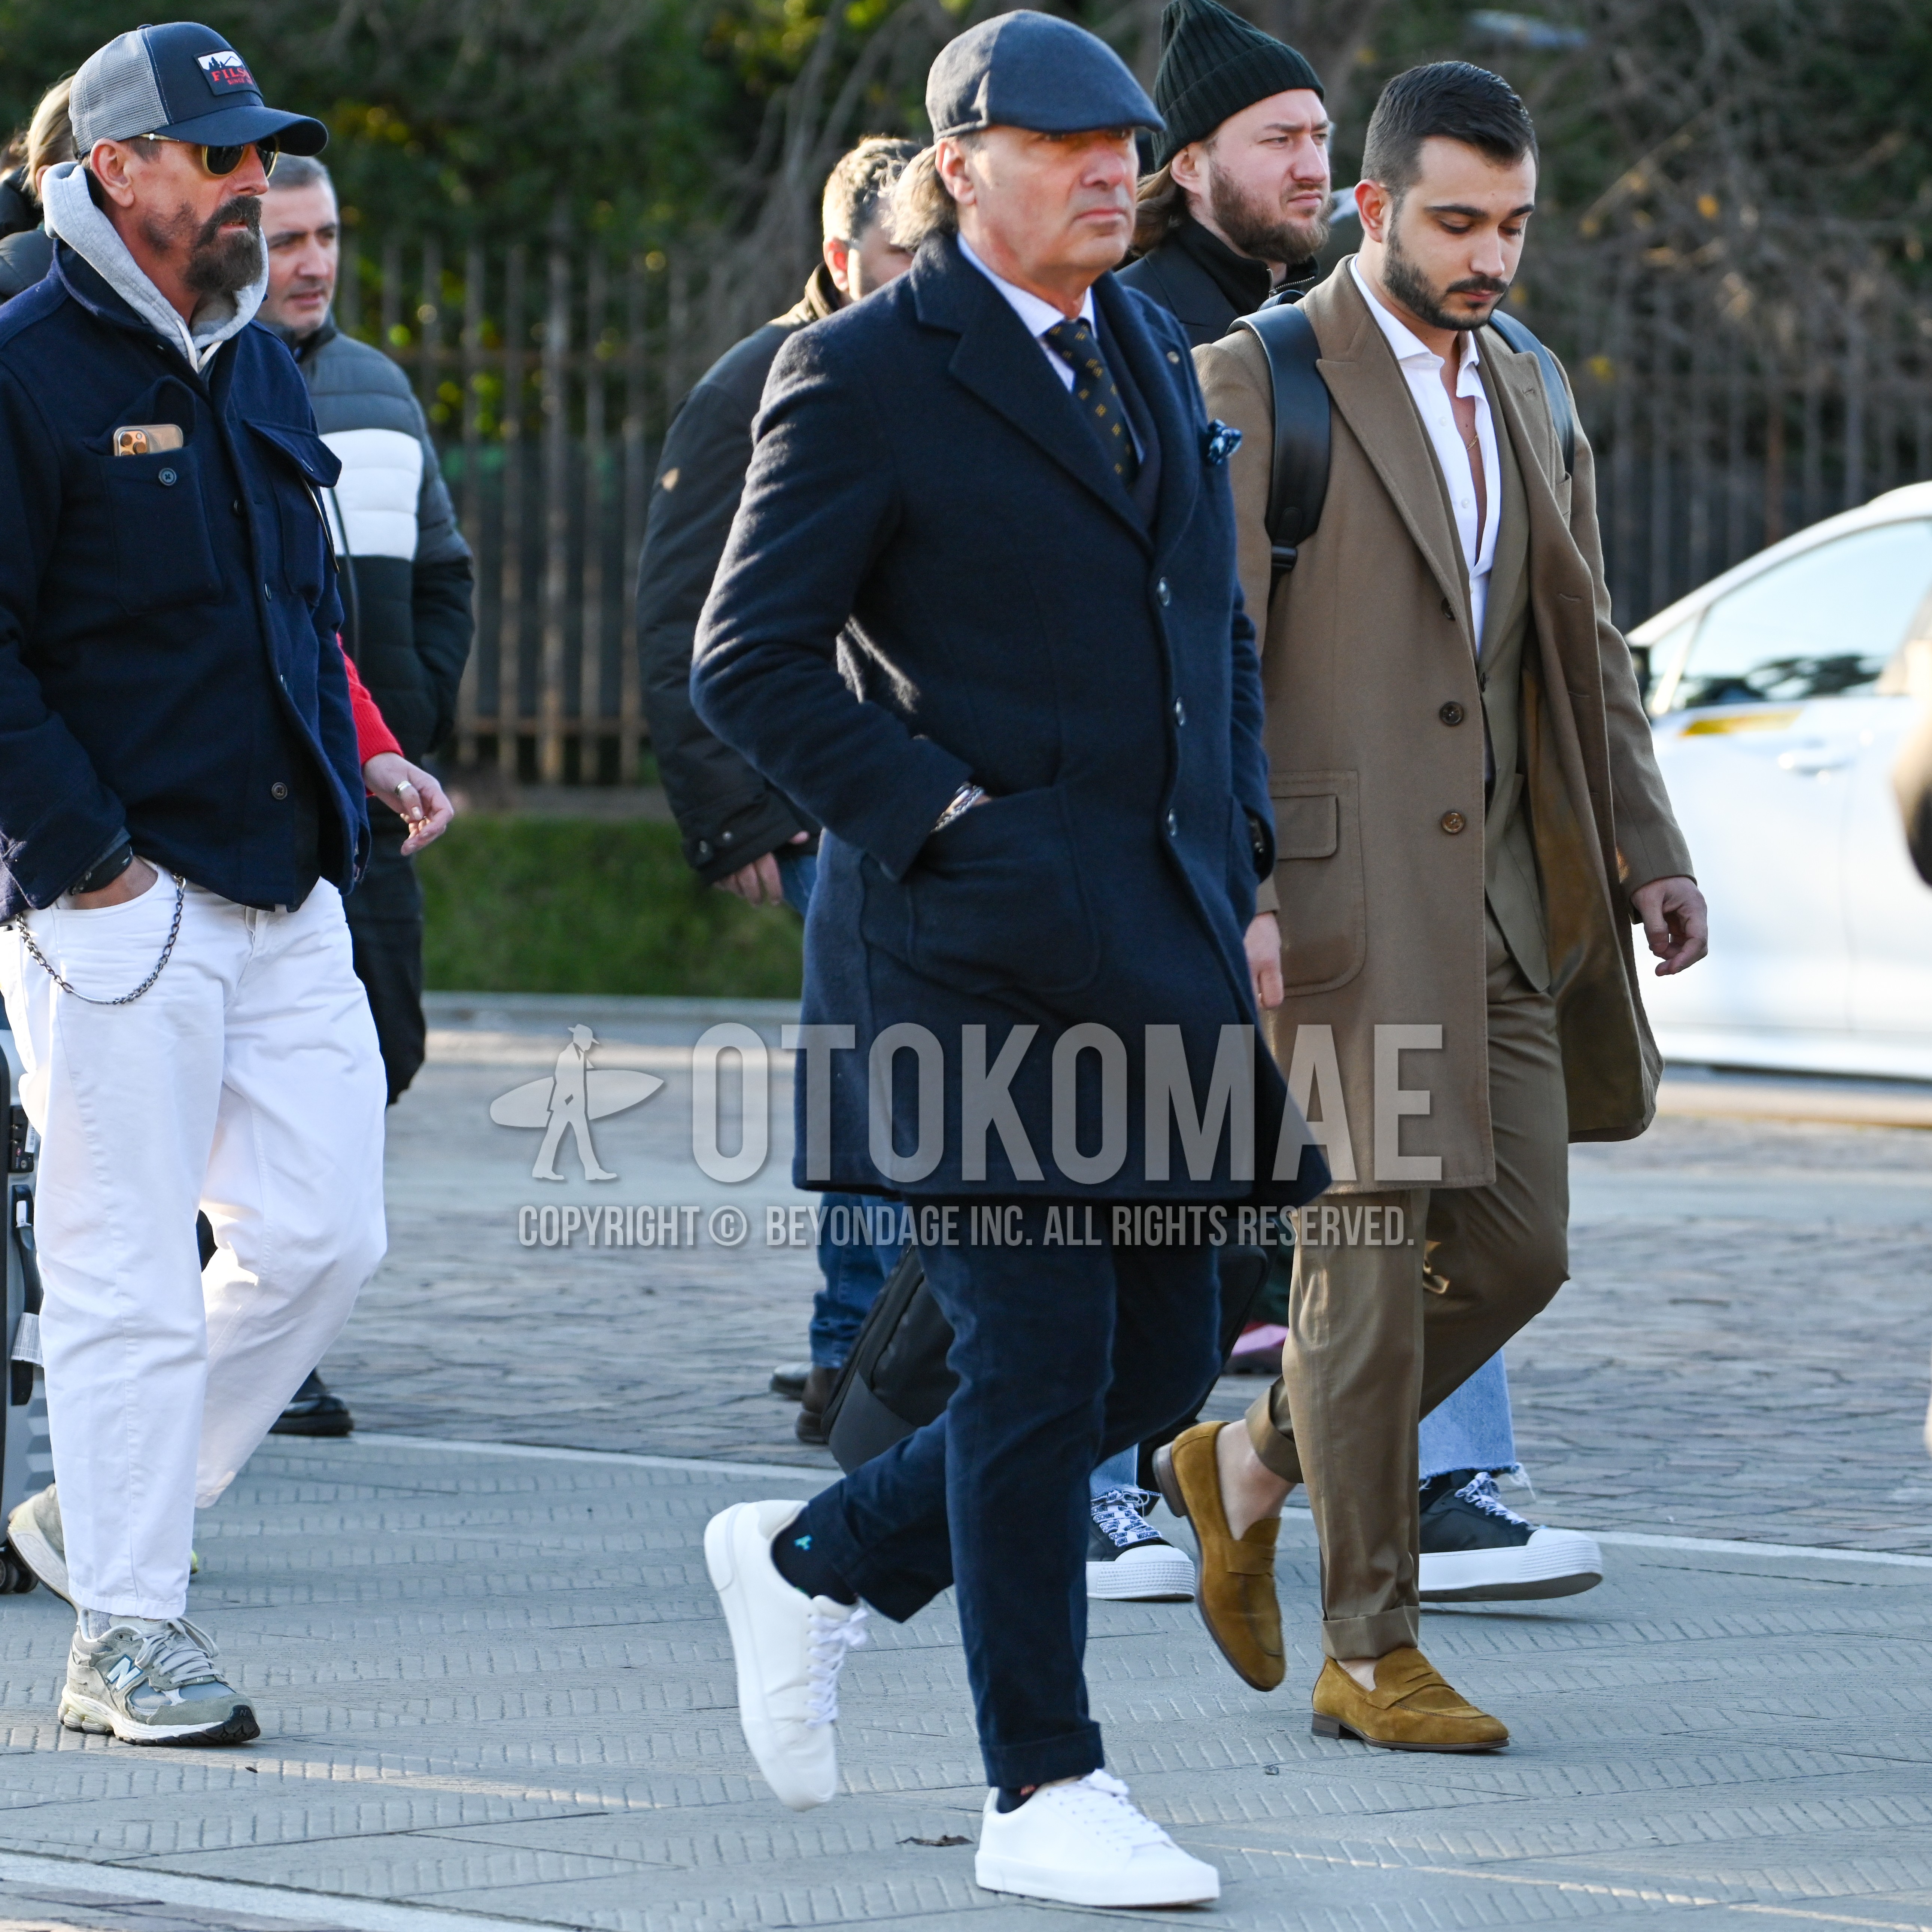 Men's autumn winter outfit with dark gray plain hunting cap, navy plain chester coat, white plain shirt, navy plain chinos, black one point socks, white low-cut sneakers, navy yellow small crest necktie.